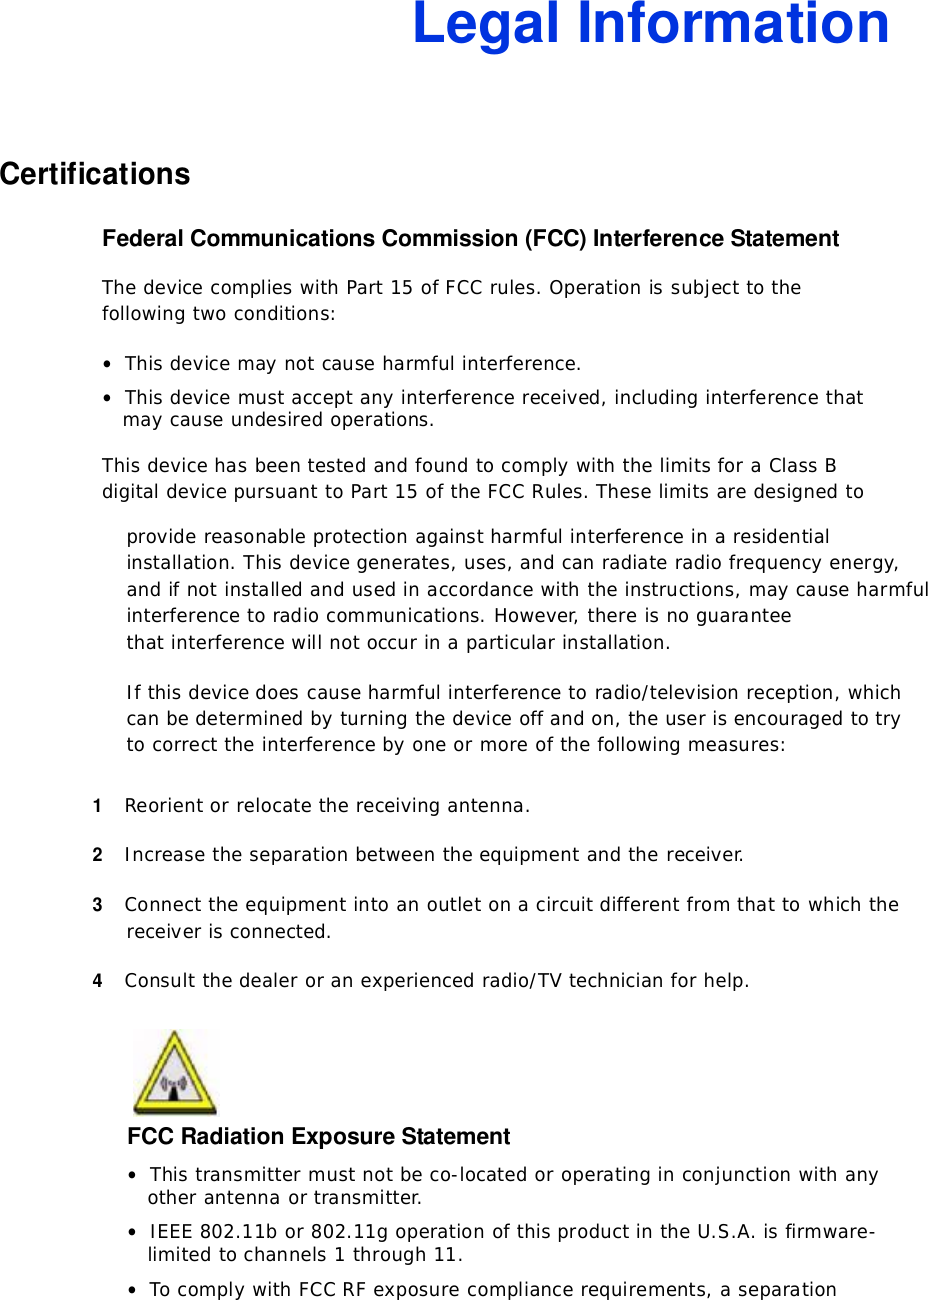 Legal InformationCertificationsFederal Communications Commission (FCC) Interference StatementThedevicecomplieswithPart15ofFCCrules.Operationissubjecttothe followingtwoconditions:•Thisdevicemaynotcauseharmfulinterference.•Thisdevicemustacceptanyinterferencereceived,includinginterferencethatmaycauseundesiredoperations.ThisdevicehasbeentestedandfoundtocomplywiththelimitsforaClassBdigitaldevicepursuanttoPart15oftheFCCRules.Theselimitsaredesignedto providereasonableprotectionagainstharmfulinterferenceinaresidentialinstallation.Thisdevicegenerates,uses,andcanradiateradiofrequencyenergy, andifnotinstalledandusedinaccordancewiththeinstructions,maycause harmfulinterferencetoradiocommunications.However,thereisnoguaranteethatinterferencewillnotoccurinaparticularinstallation.Ifthisdevicedoescauseharmfulinterferencetoradio/televisionreception,which canbedeterminedbyturningthedeviceoffandon,theuserisencouragedtotrytocorrecttheinterferencebyoneormoreofthefollowingmeasures:1Reorientorrelocatethereceivingantenna.2Increasetheseparationbetweentheequipmentandthereceiver.3Connecttheequipmentintoanoutletonacircuitdifferentfromthattowhichthe receiverisconnected.4Consultthedealeroranexperiencedradio/TVtechnicianforhelp.FCC Radiation Exposure Statement•Thistransmittermustnotbeco-locatedoroperatinginconjunctionwithany otherantennaortransmitter.•IEEE802.11bor802.11goperationofthisproductintheU.S.A.isfirmware- limitedtochannels1through11.•TocomplywithFCCRFexposurecompliancerequirements,aseparation 